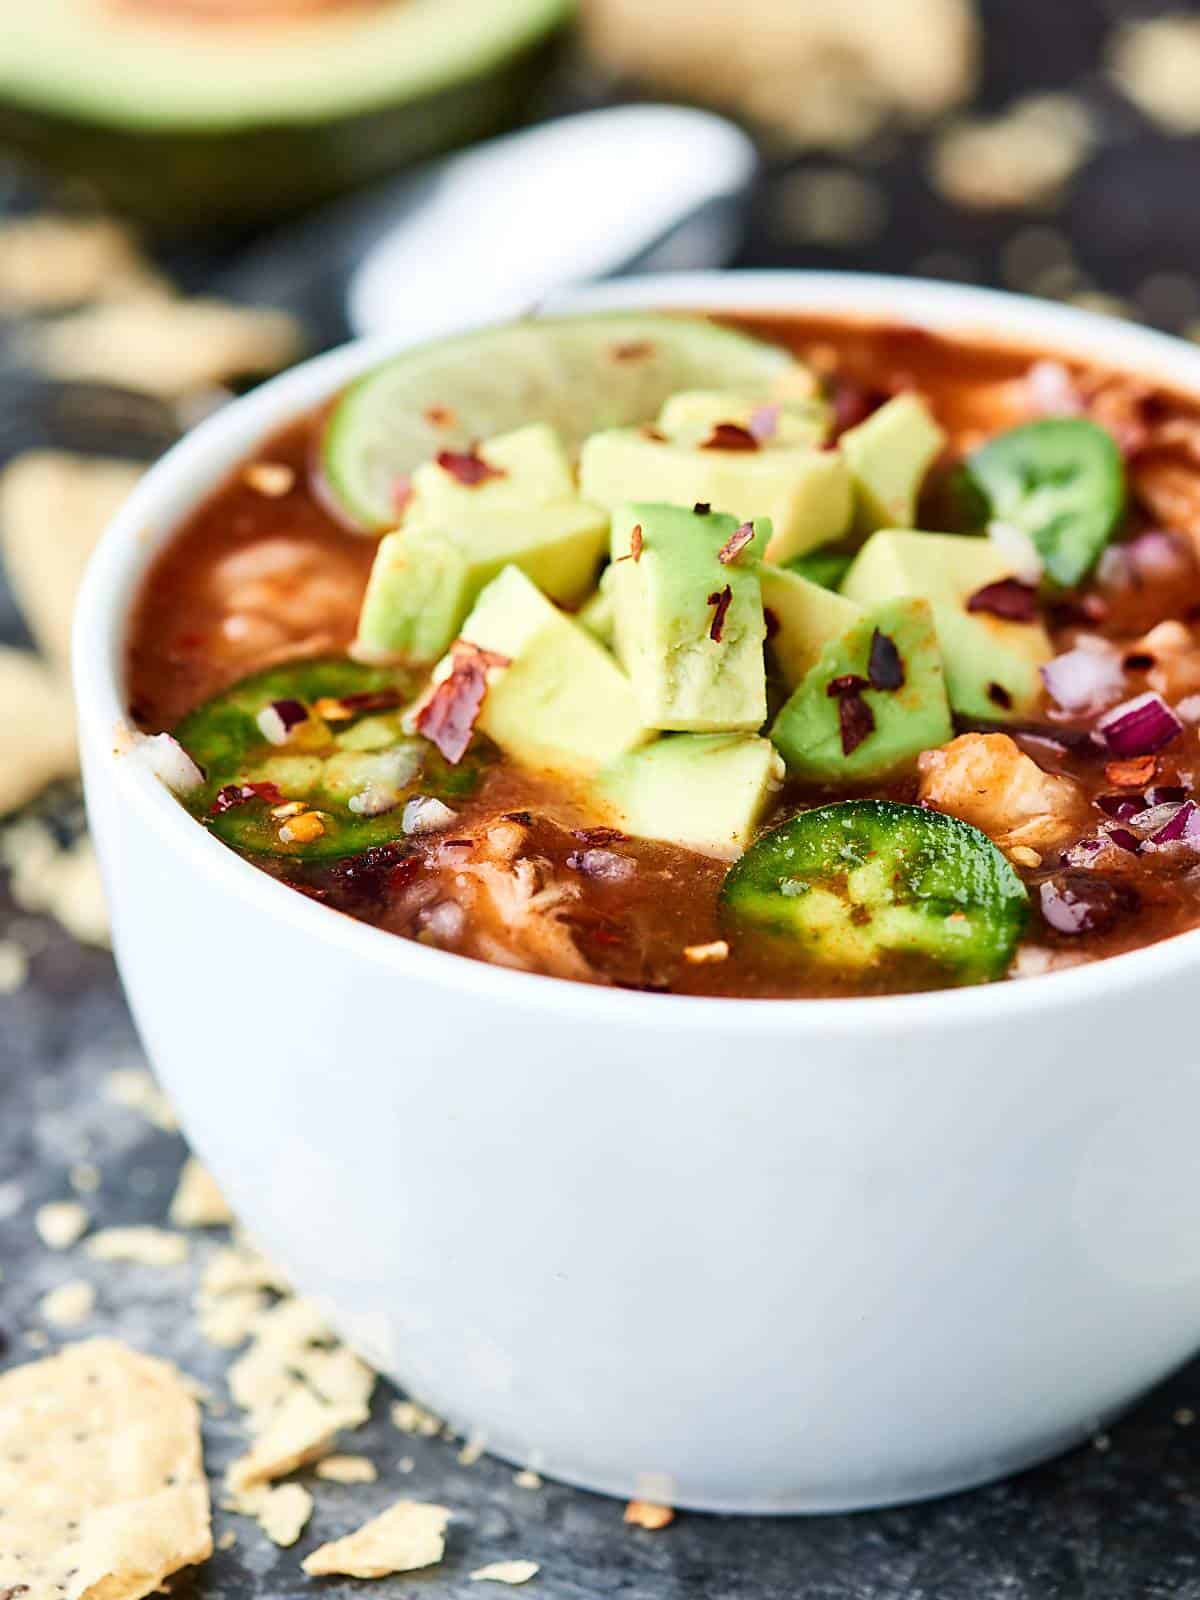 Slow Cooker Enchilada Soup Recipe - Chicken, Beans, Hominy, and More!